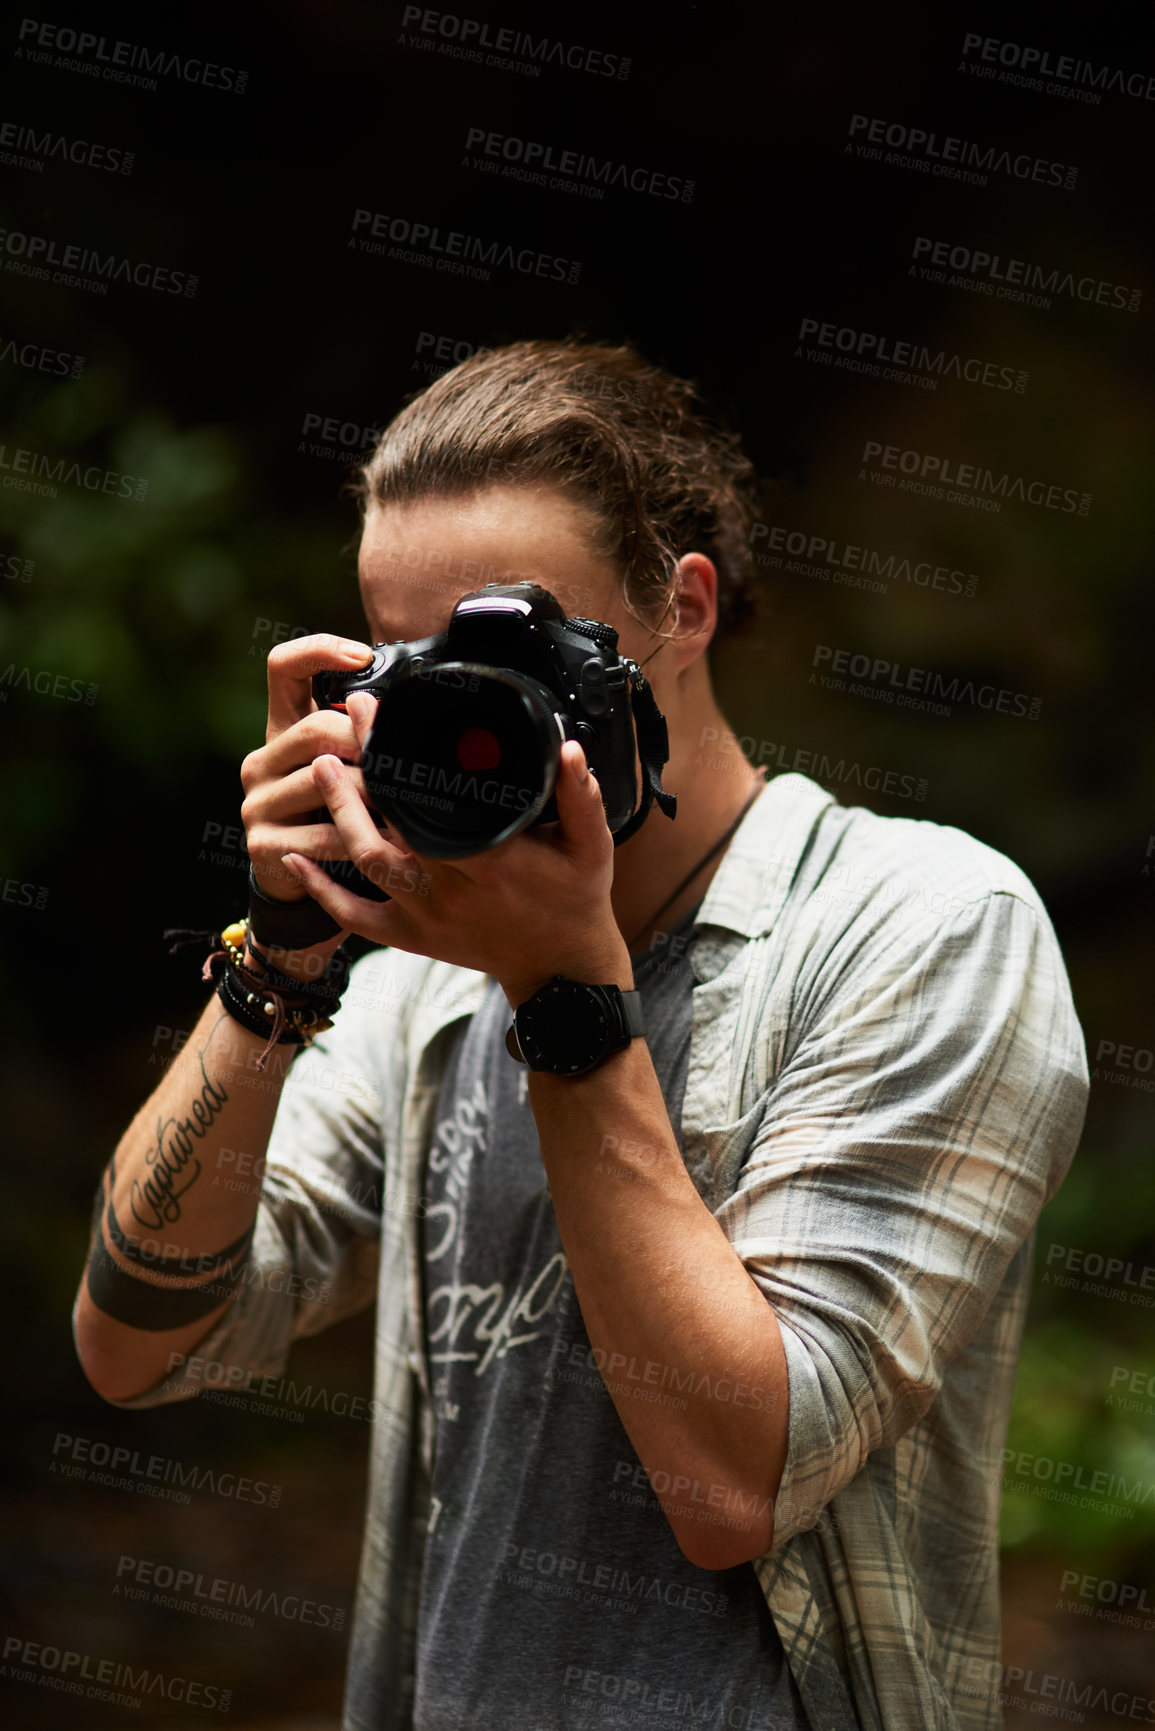 Buy stock photo Shot of a young man holding up his camera and capturing a photo in the viewer's direction